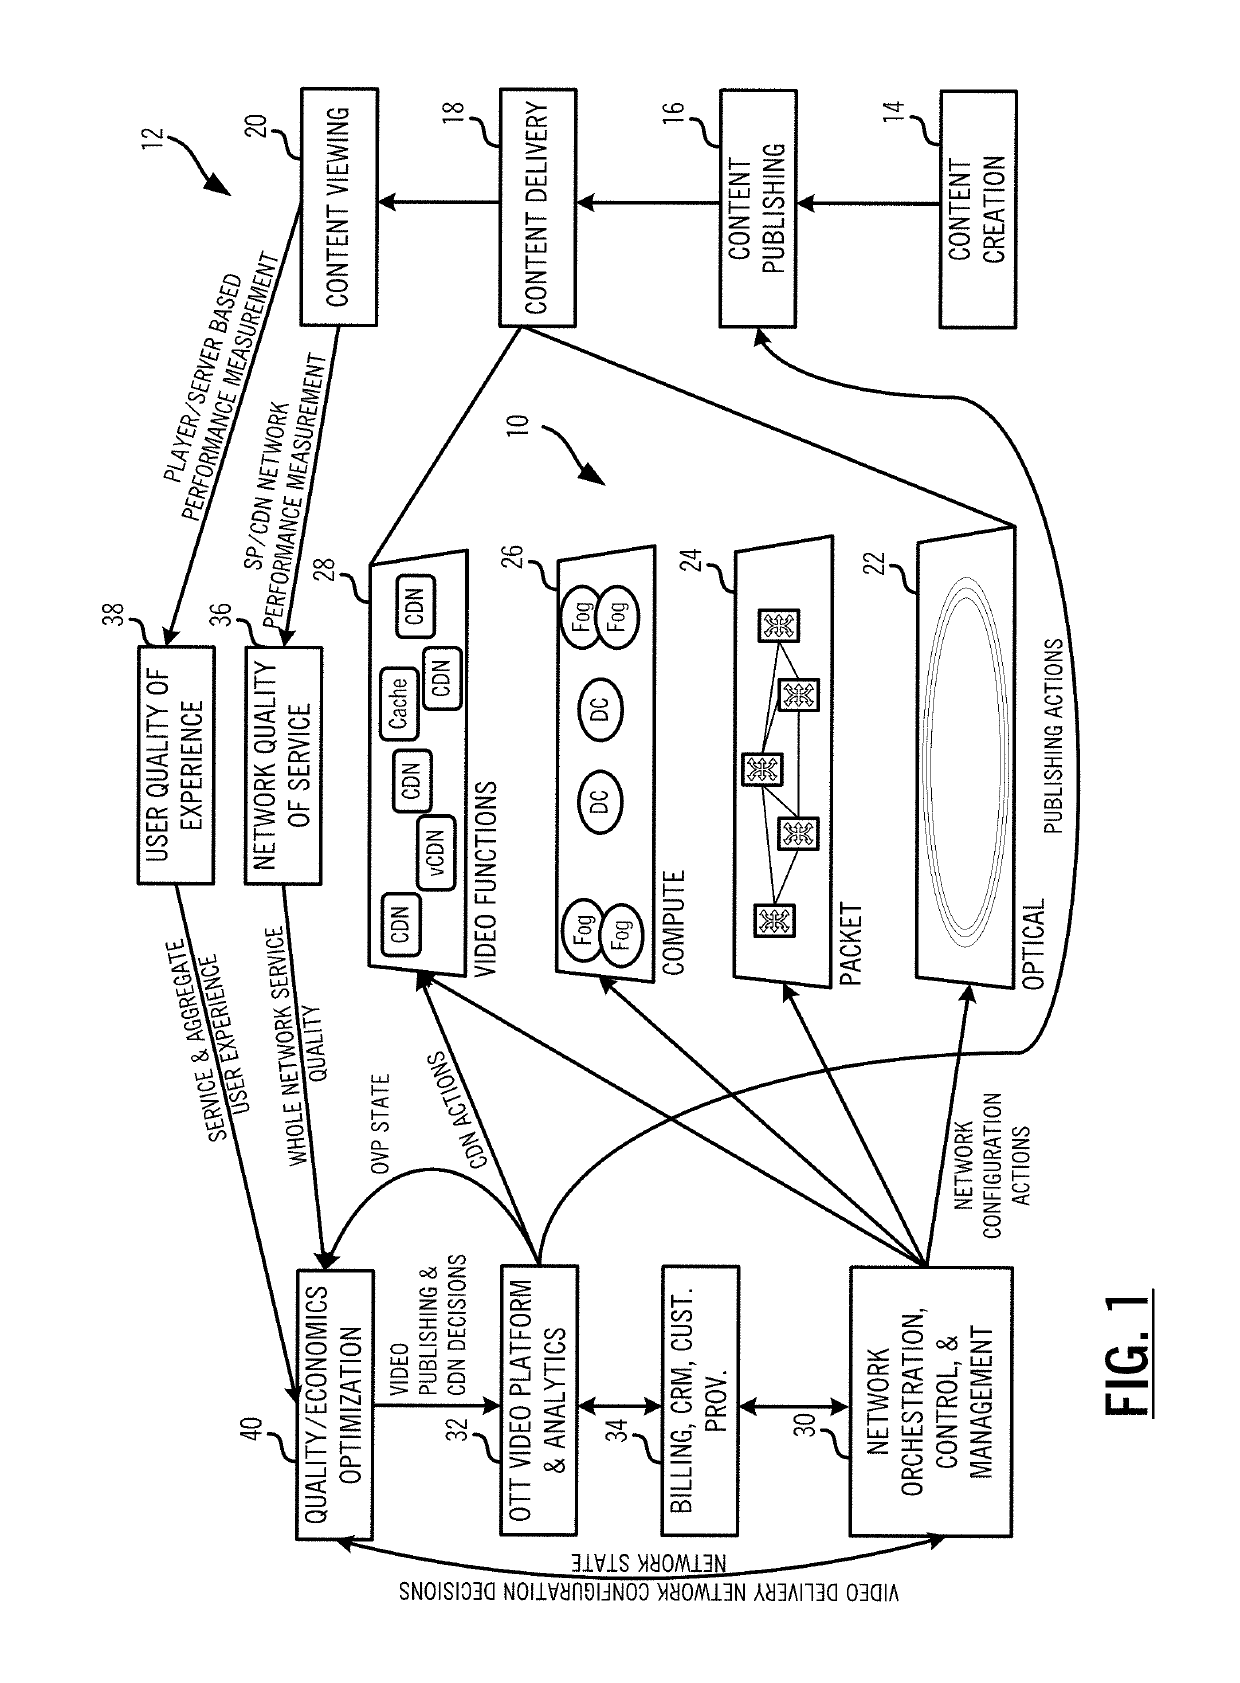 Adaptive systems and methods enhancing service Quality of Experience